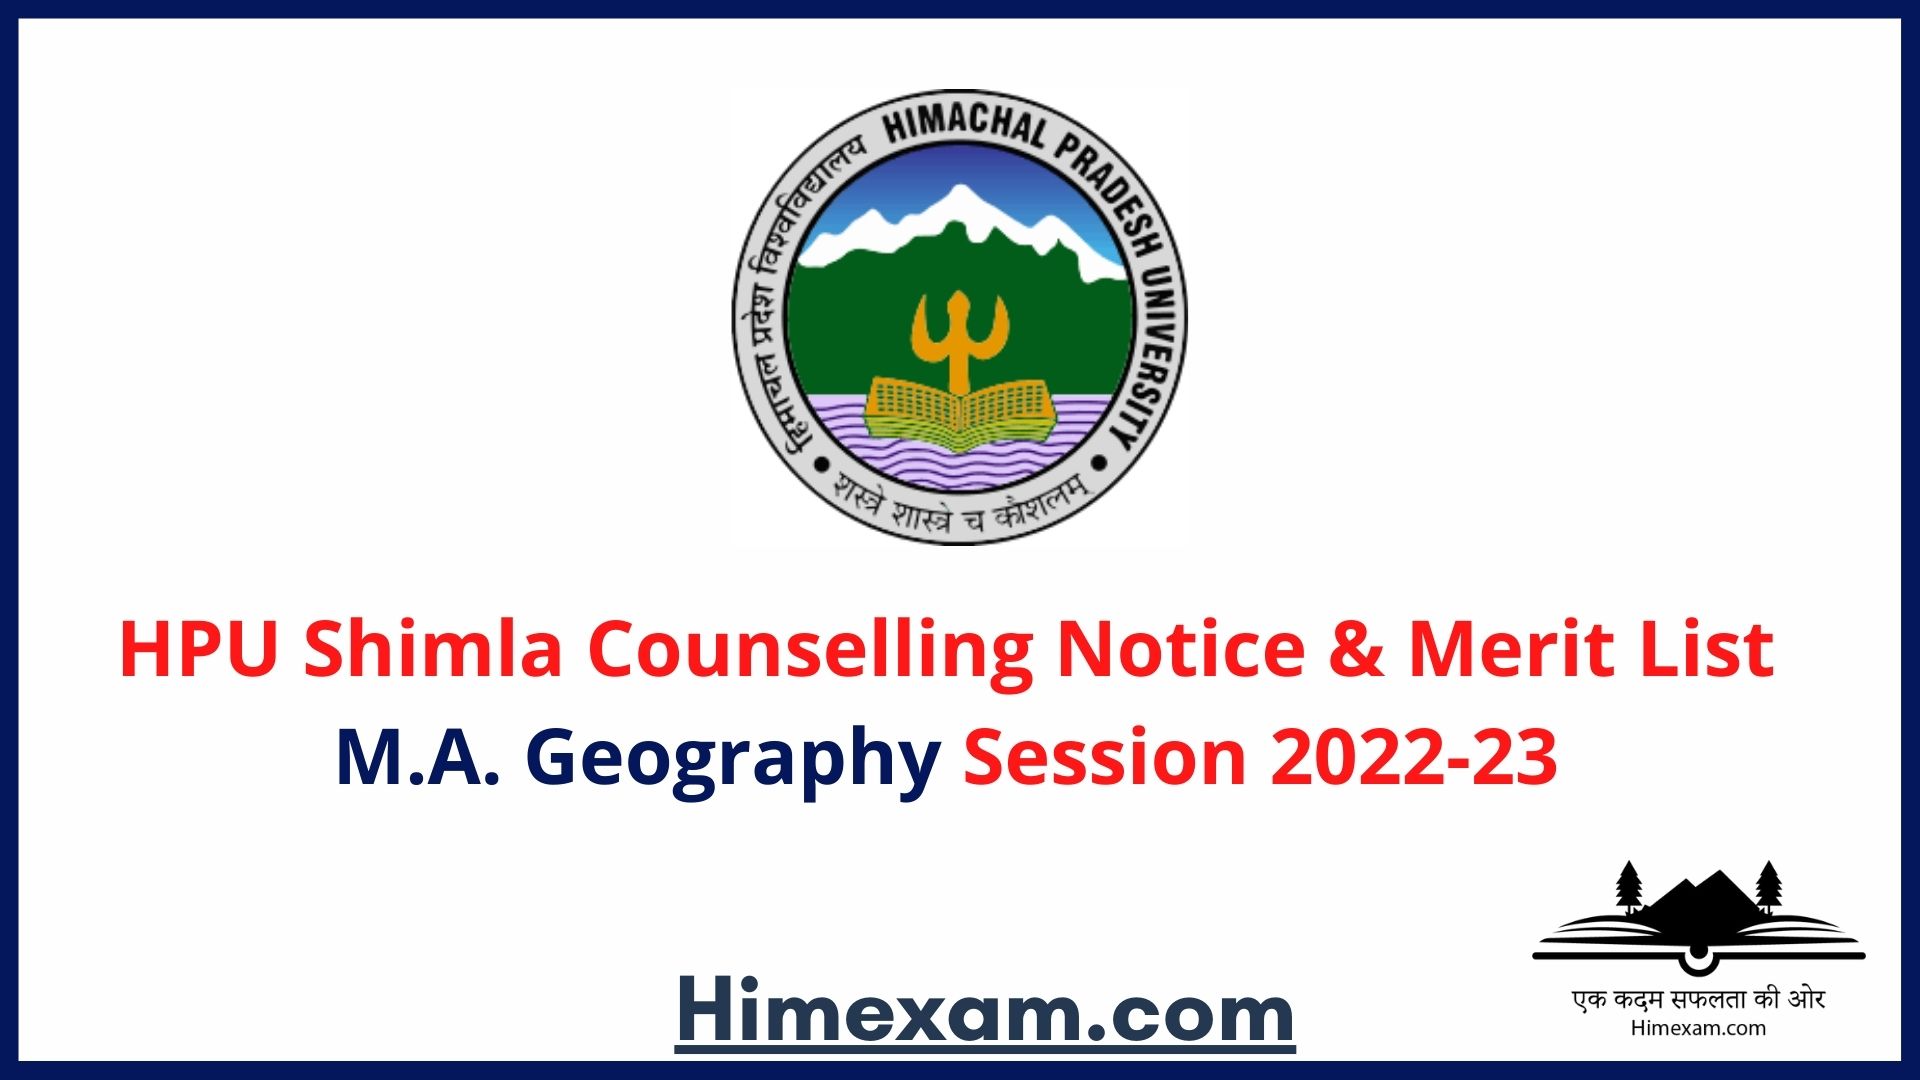 HPU Shimla Counselling Notice & Merit List M.A. Geography Session 2022-23